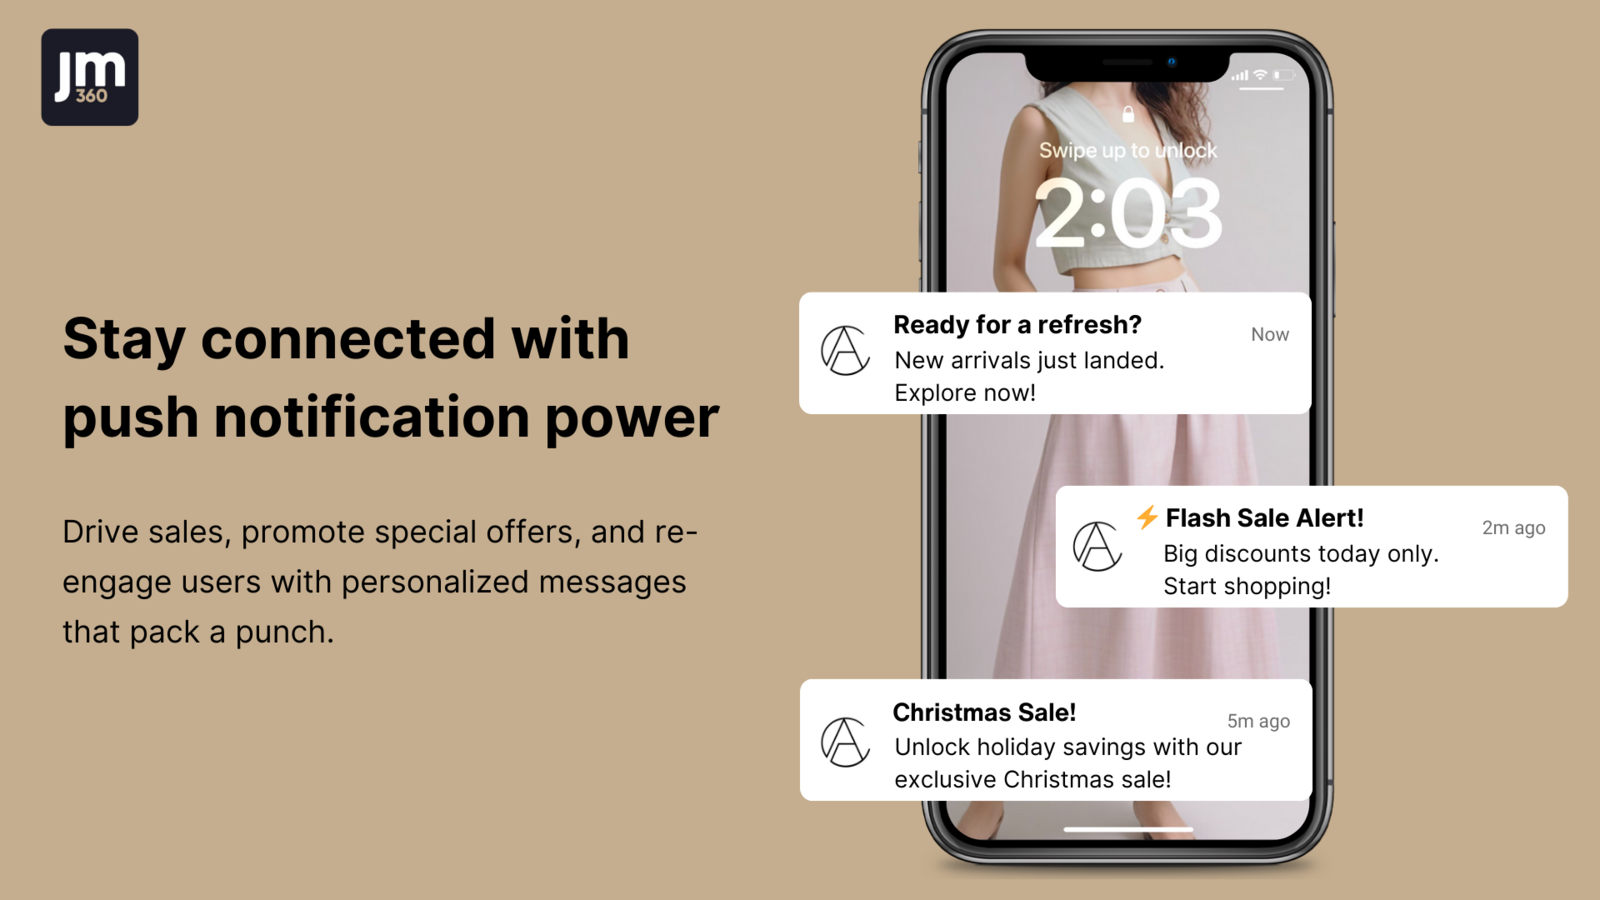 Stay connected with push notification power